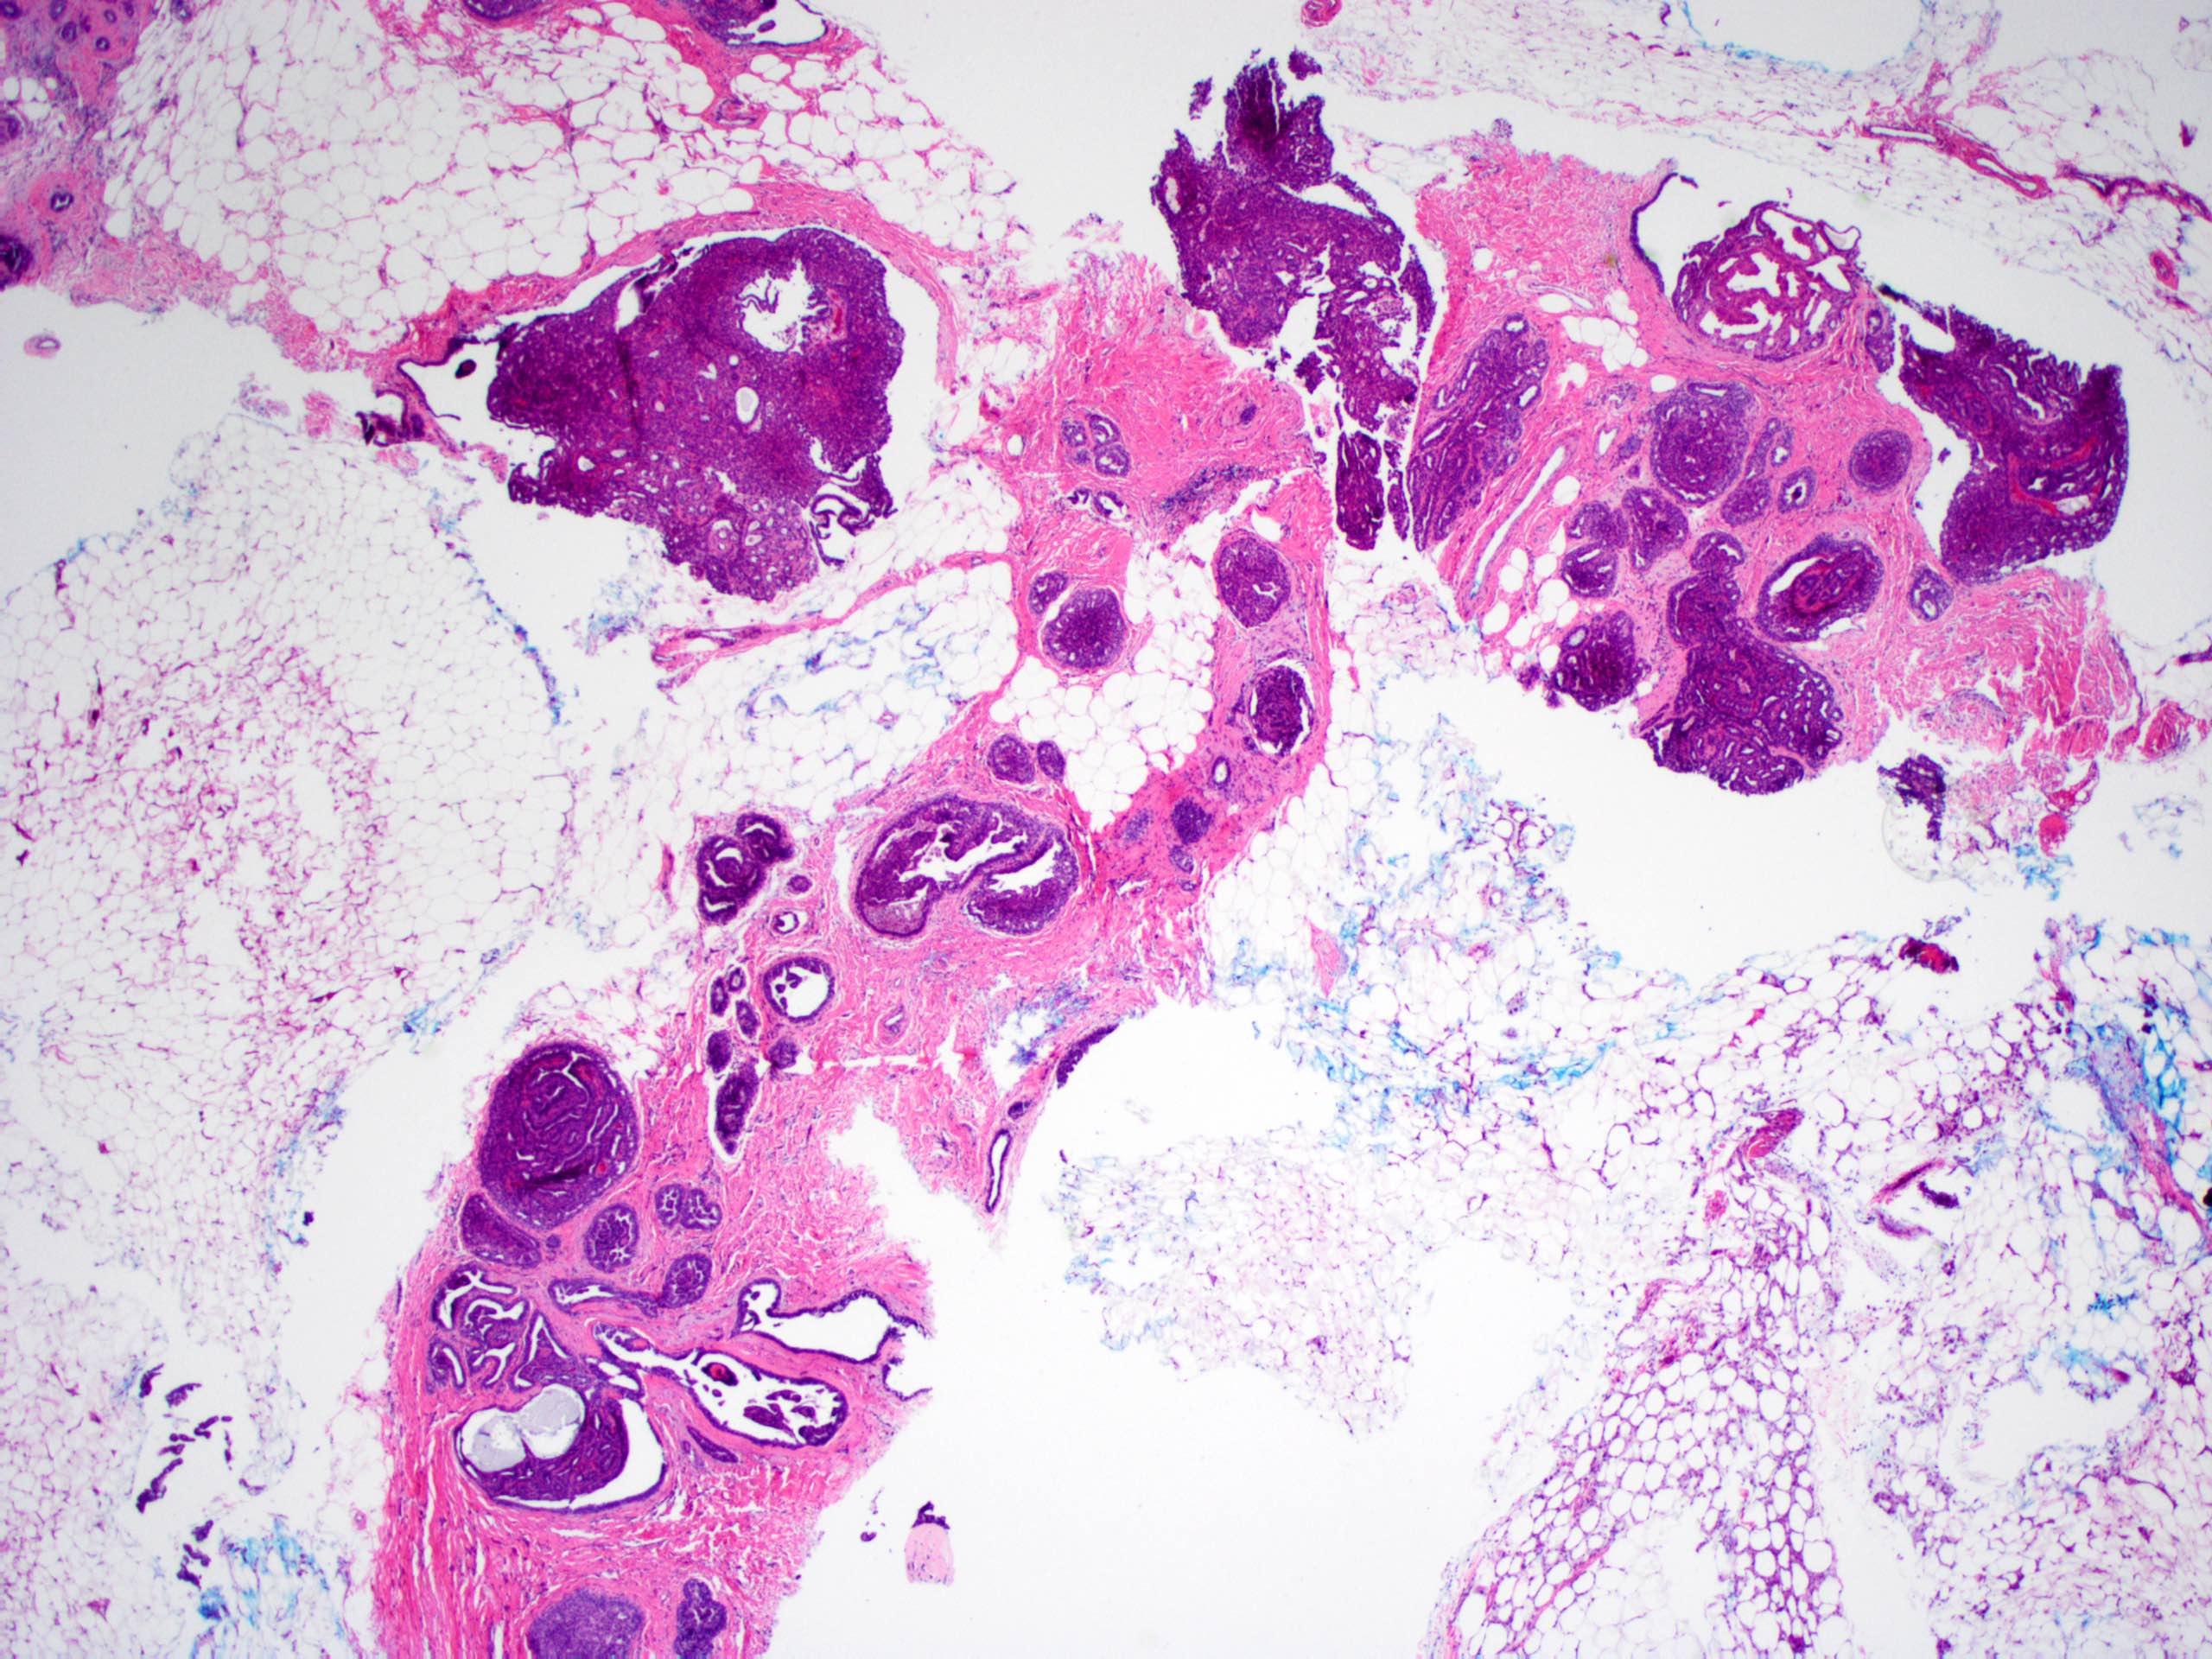 intraductal papilloma path outlines